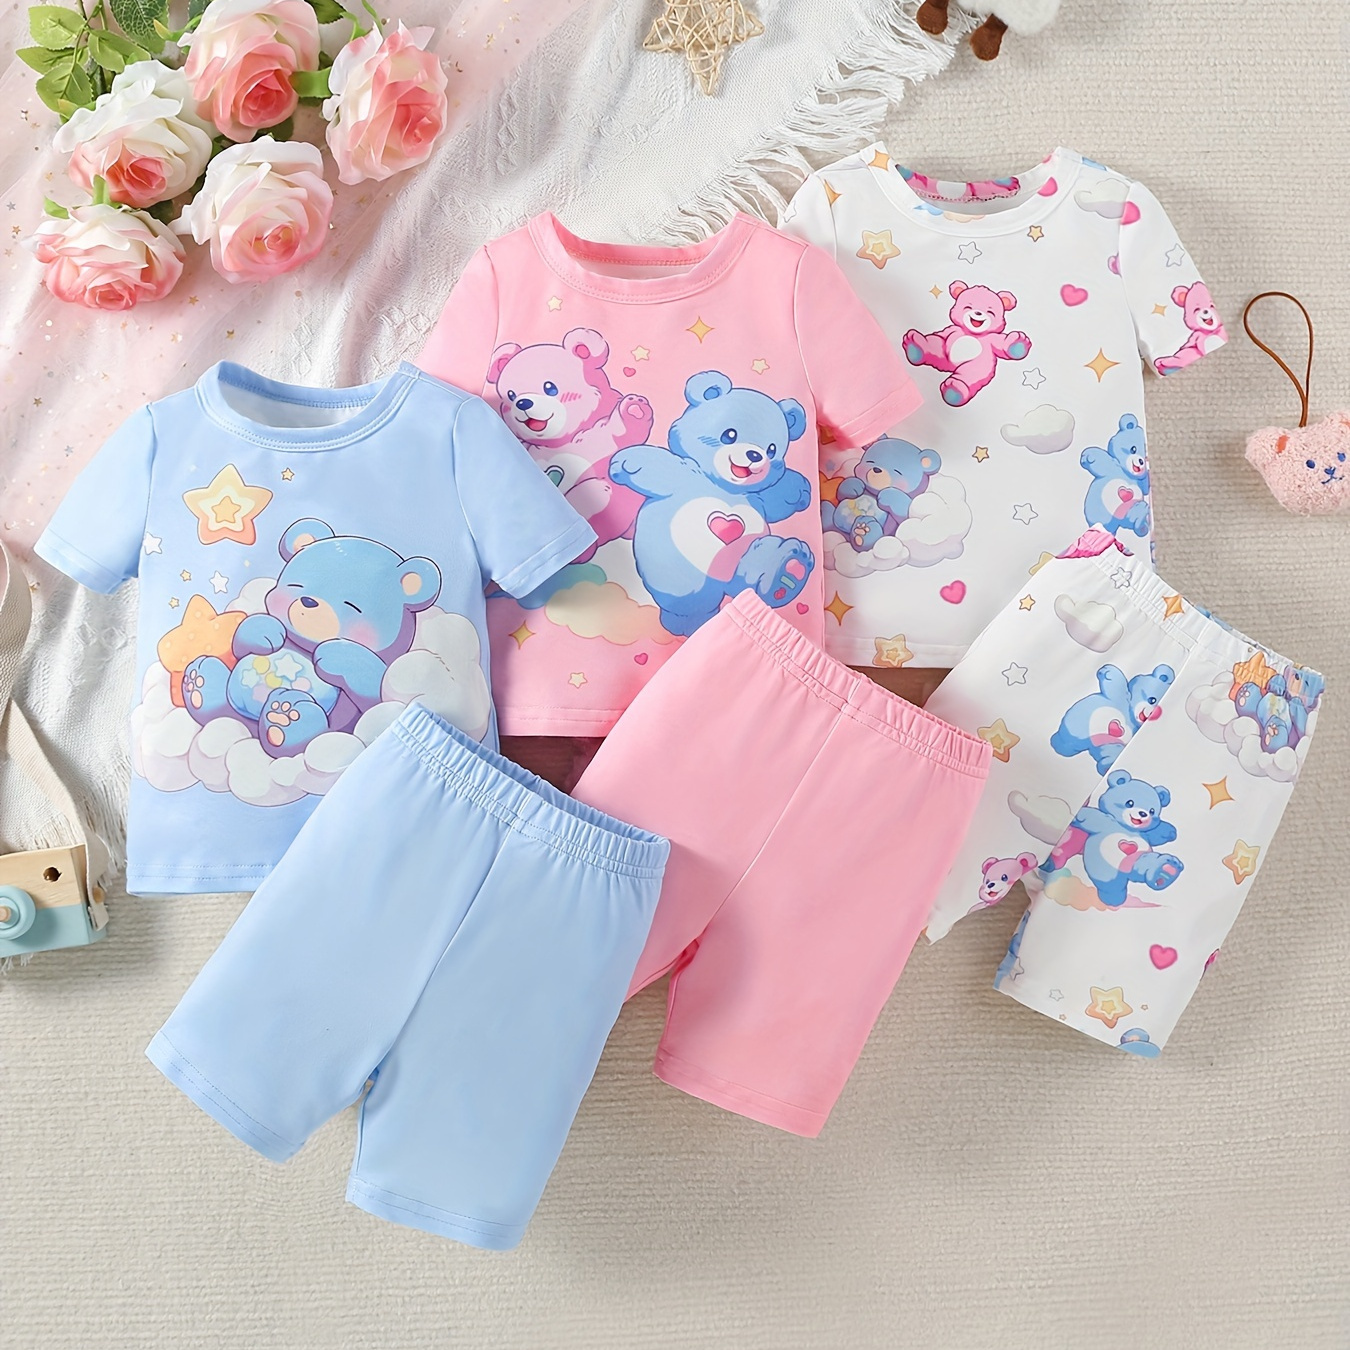 

3 Sets Baby's Adorable Bear Pattern T-shirt & Solid Color Shorts Set, Toddler & Infant Girl's Clothes For Summer Daily Wear